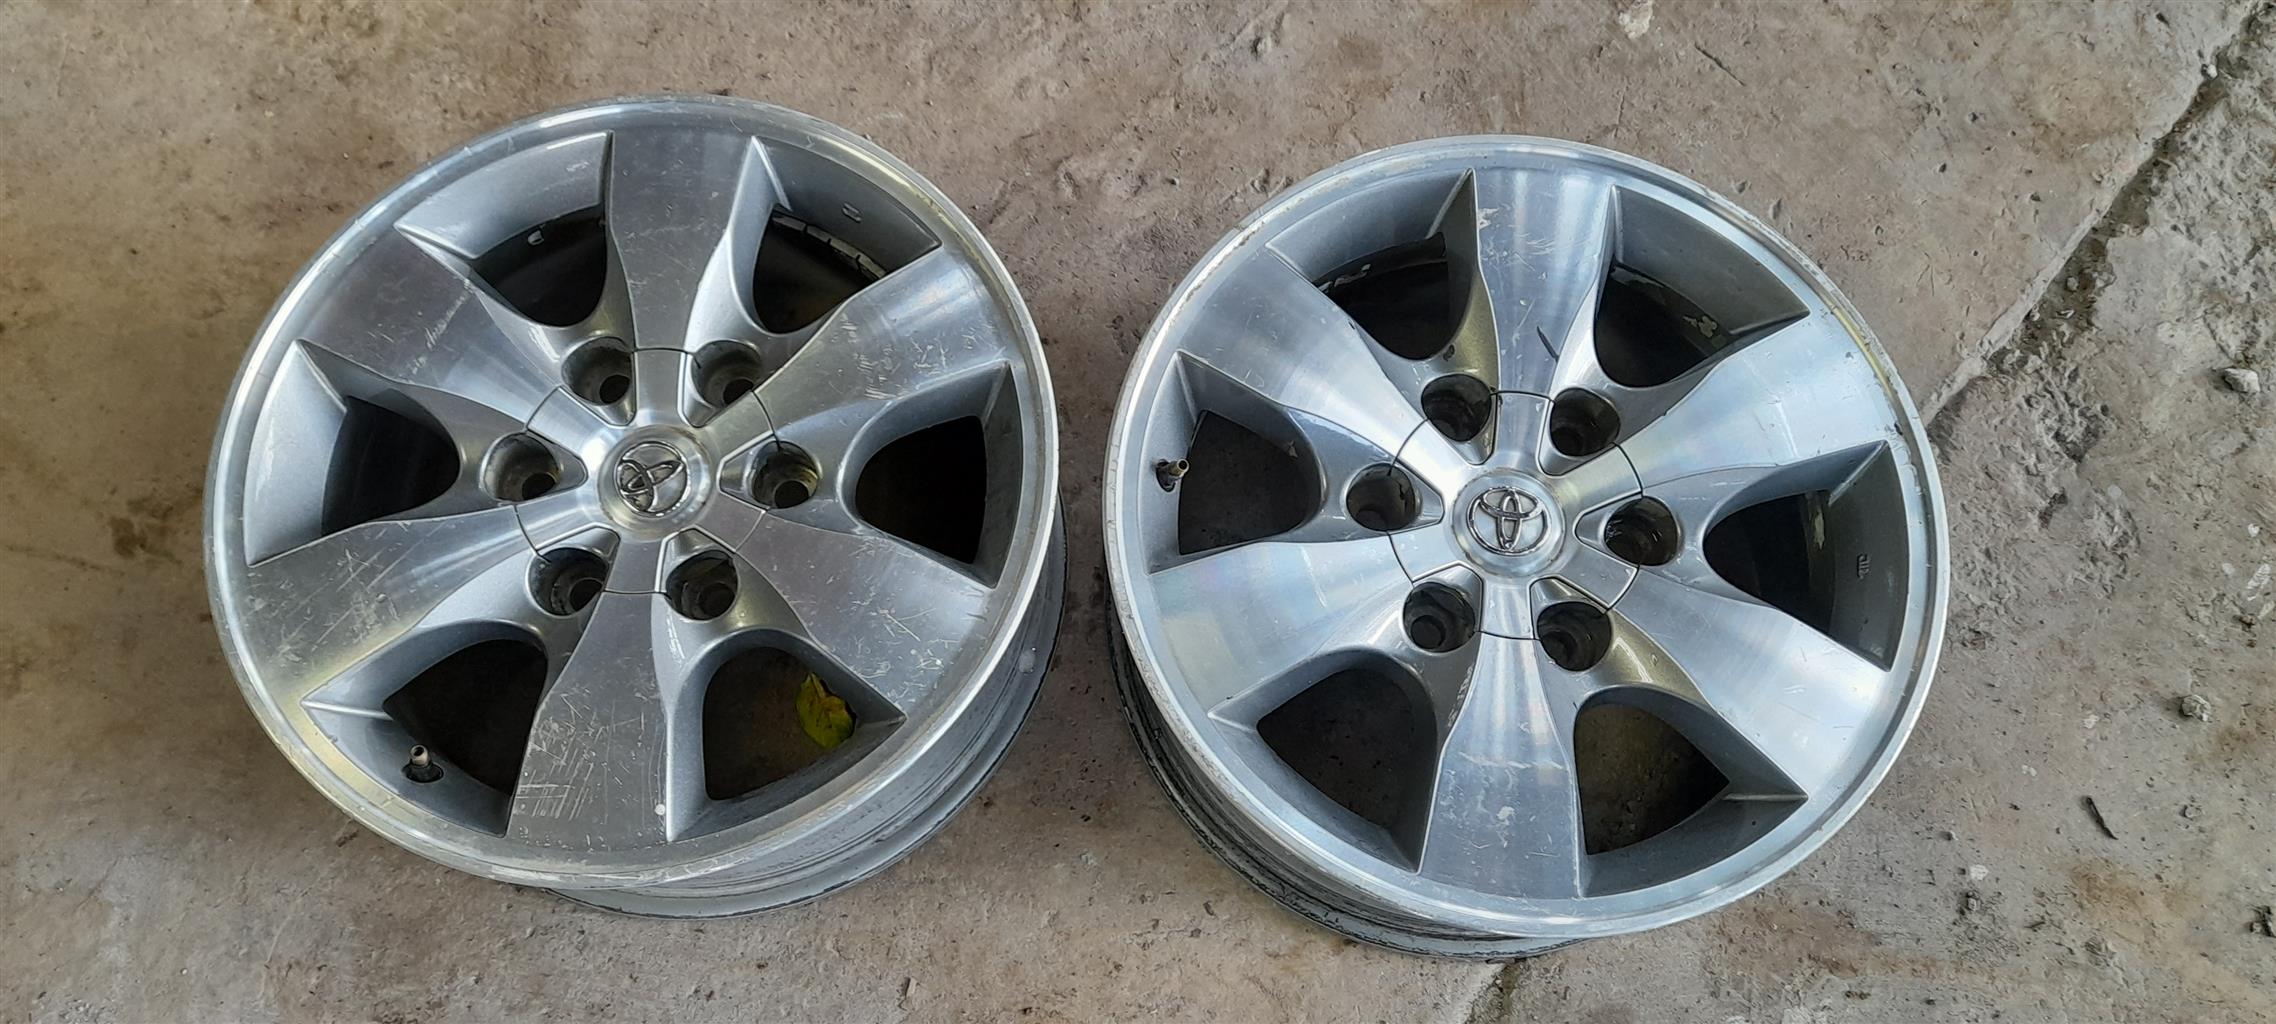 Toyota hilux rims x2 for sale